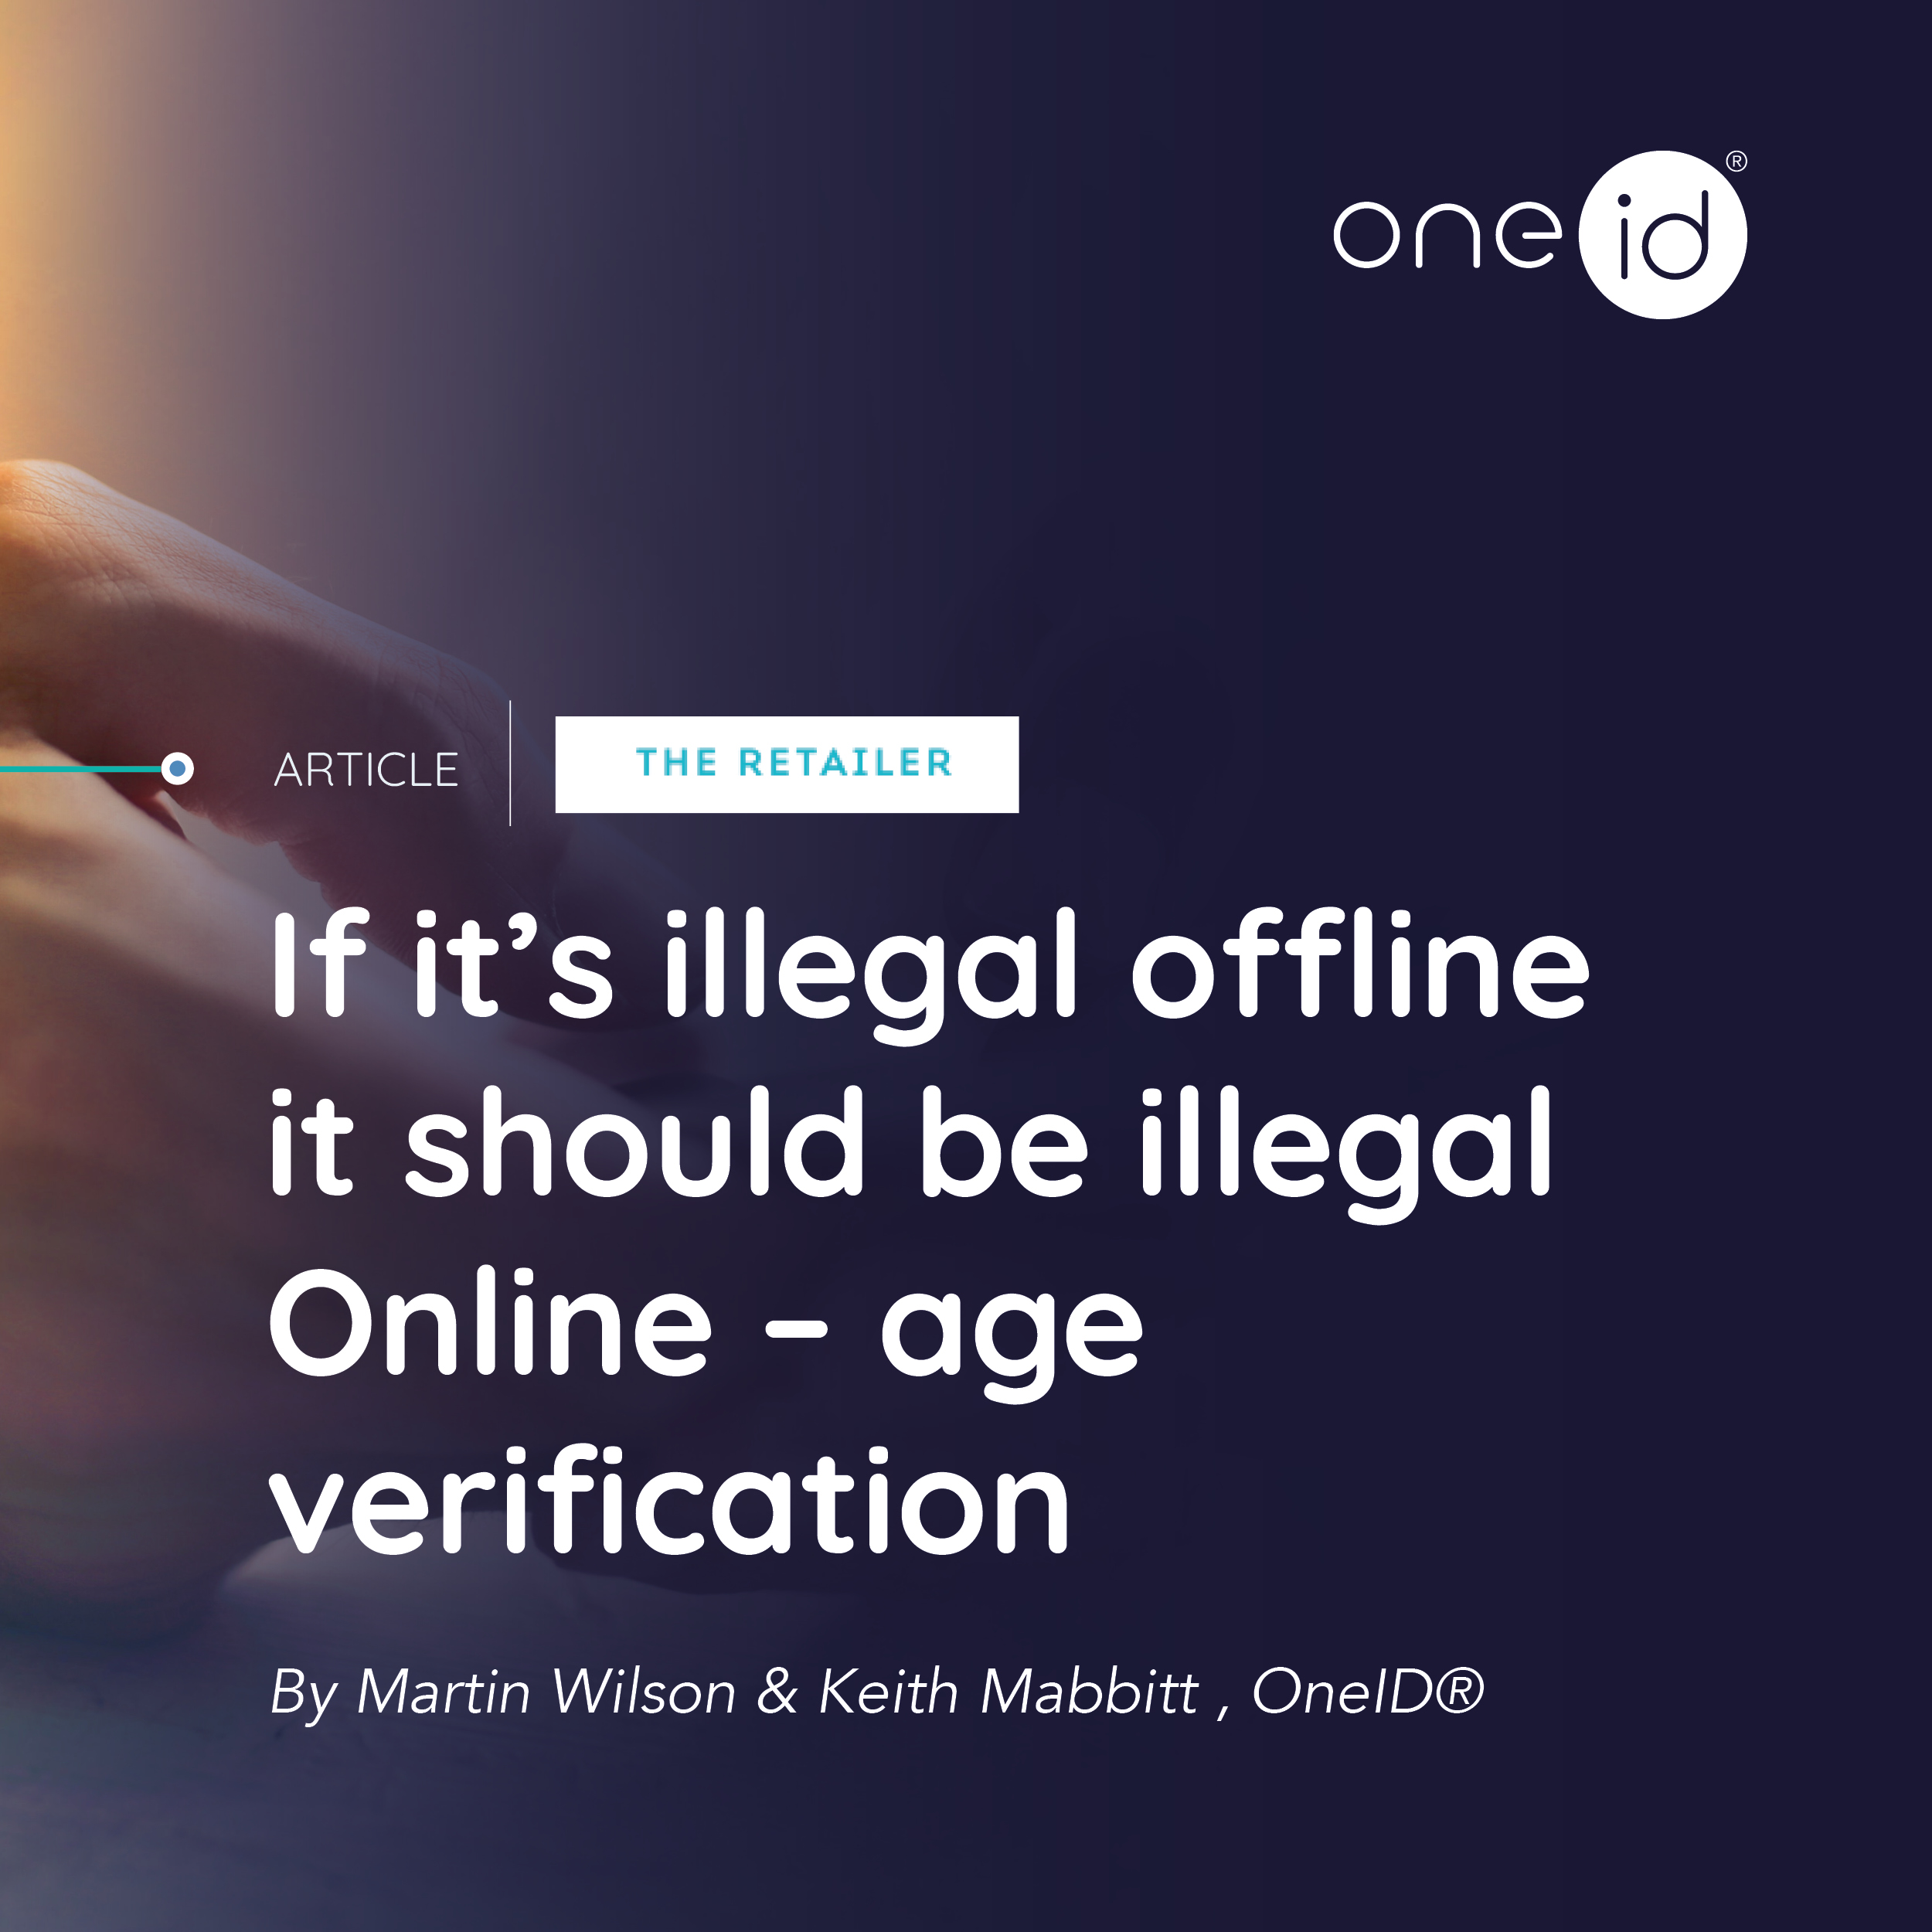 If it’s illegal offline it should be illegal online – age verification